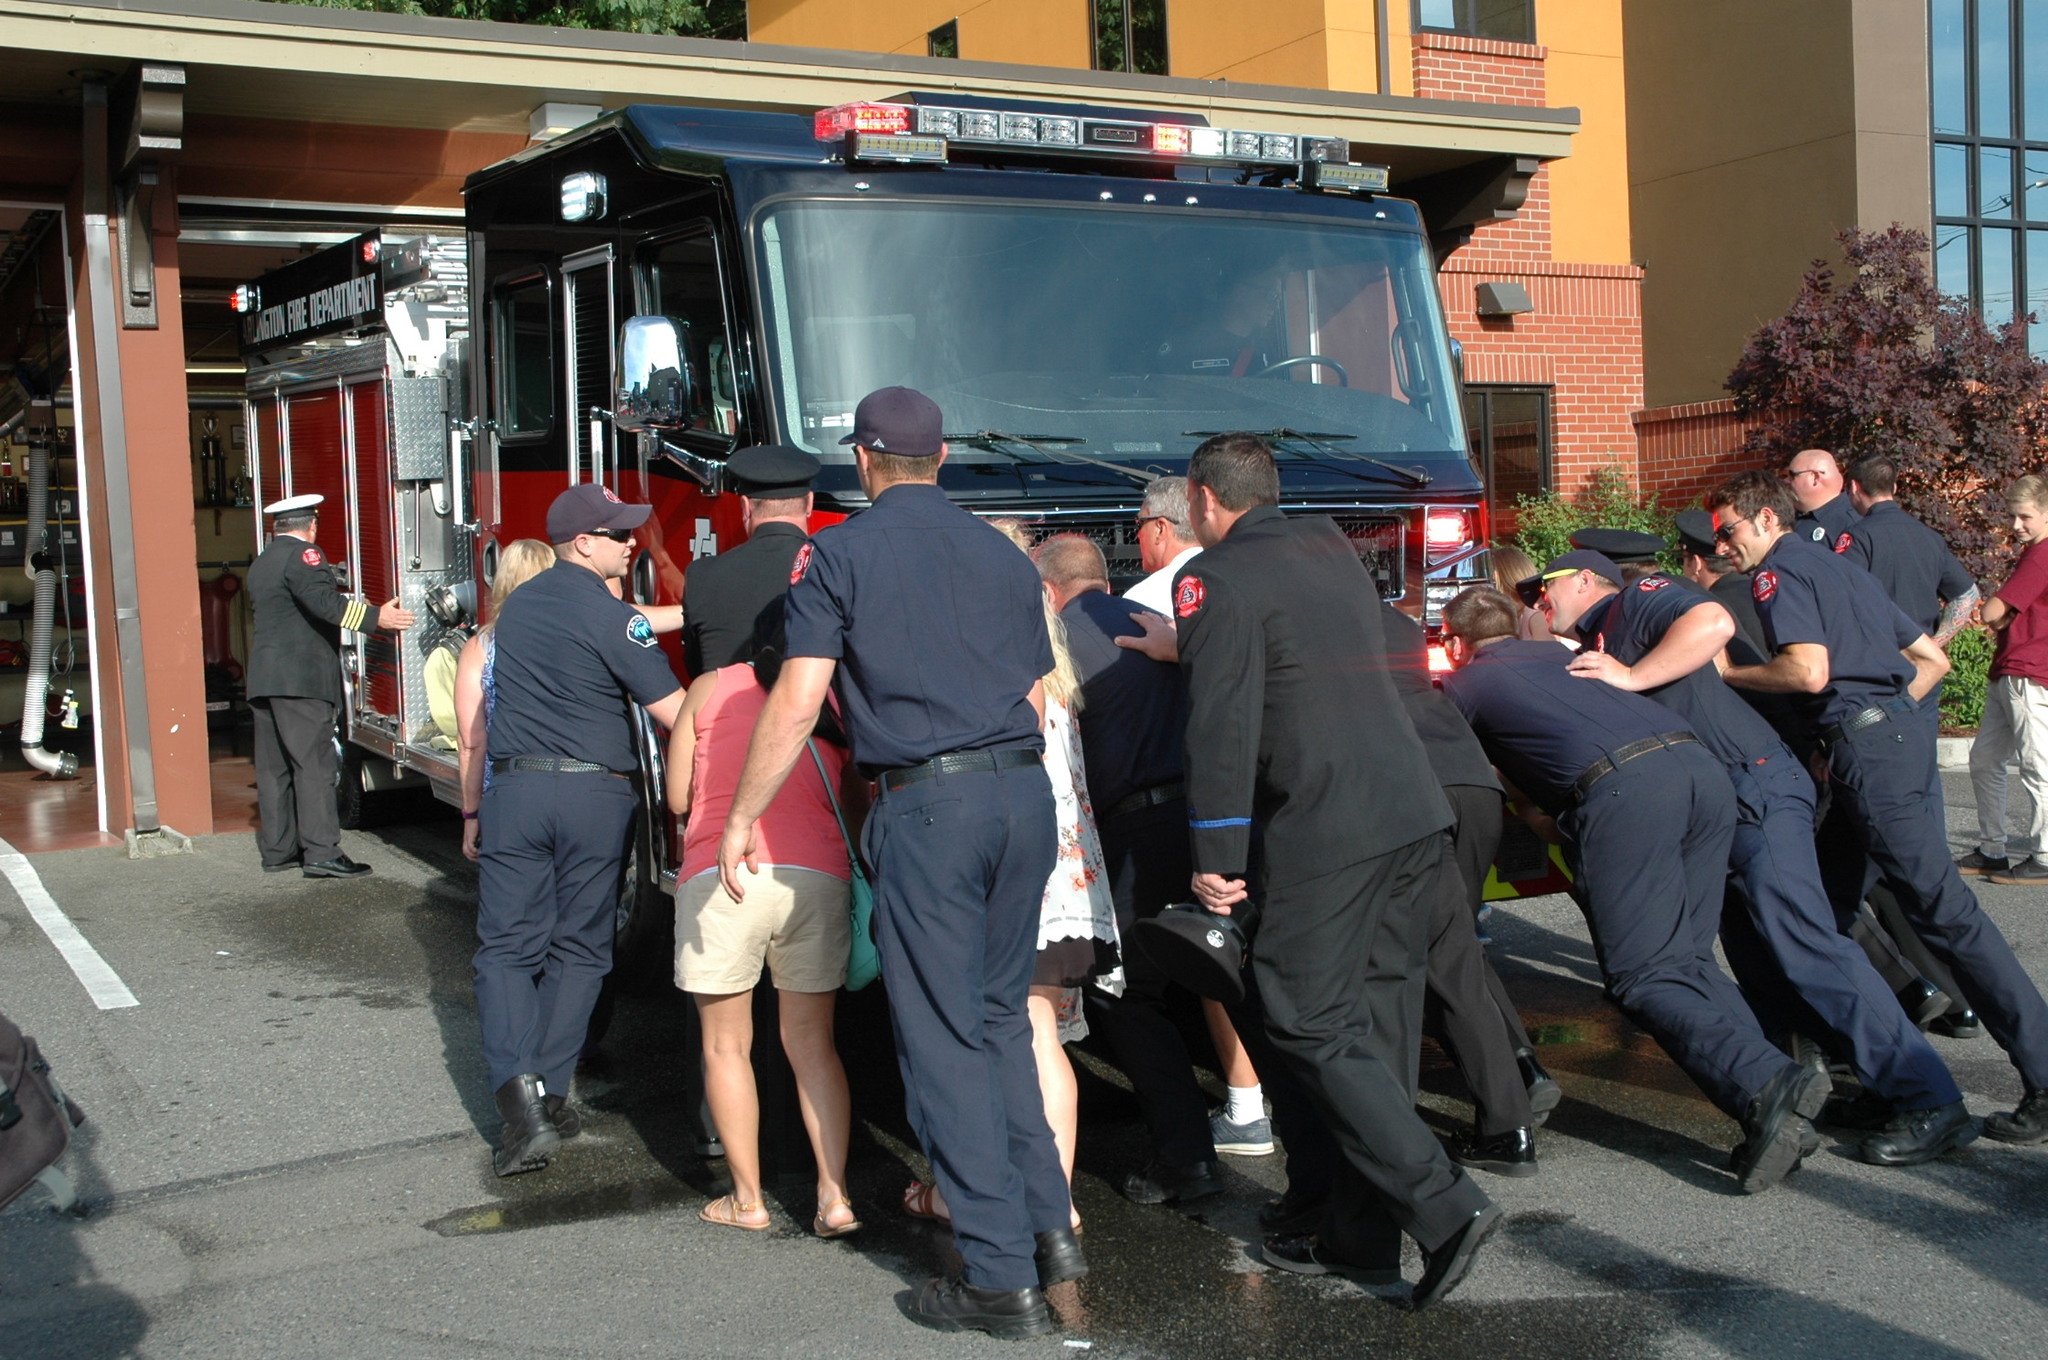 Kirk Boxleitner/Staff PhotoArlington firefighters and citizens help push the city’s new fire engine into its bay at Station 46 June 6.